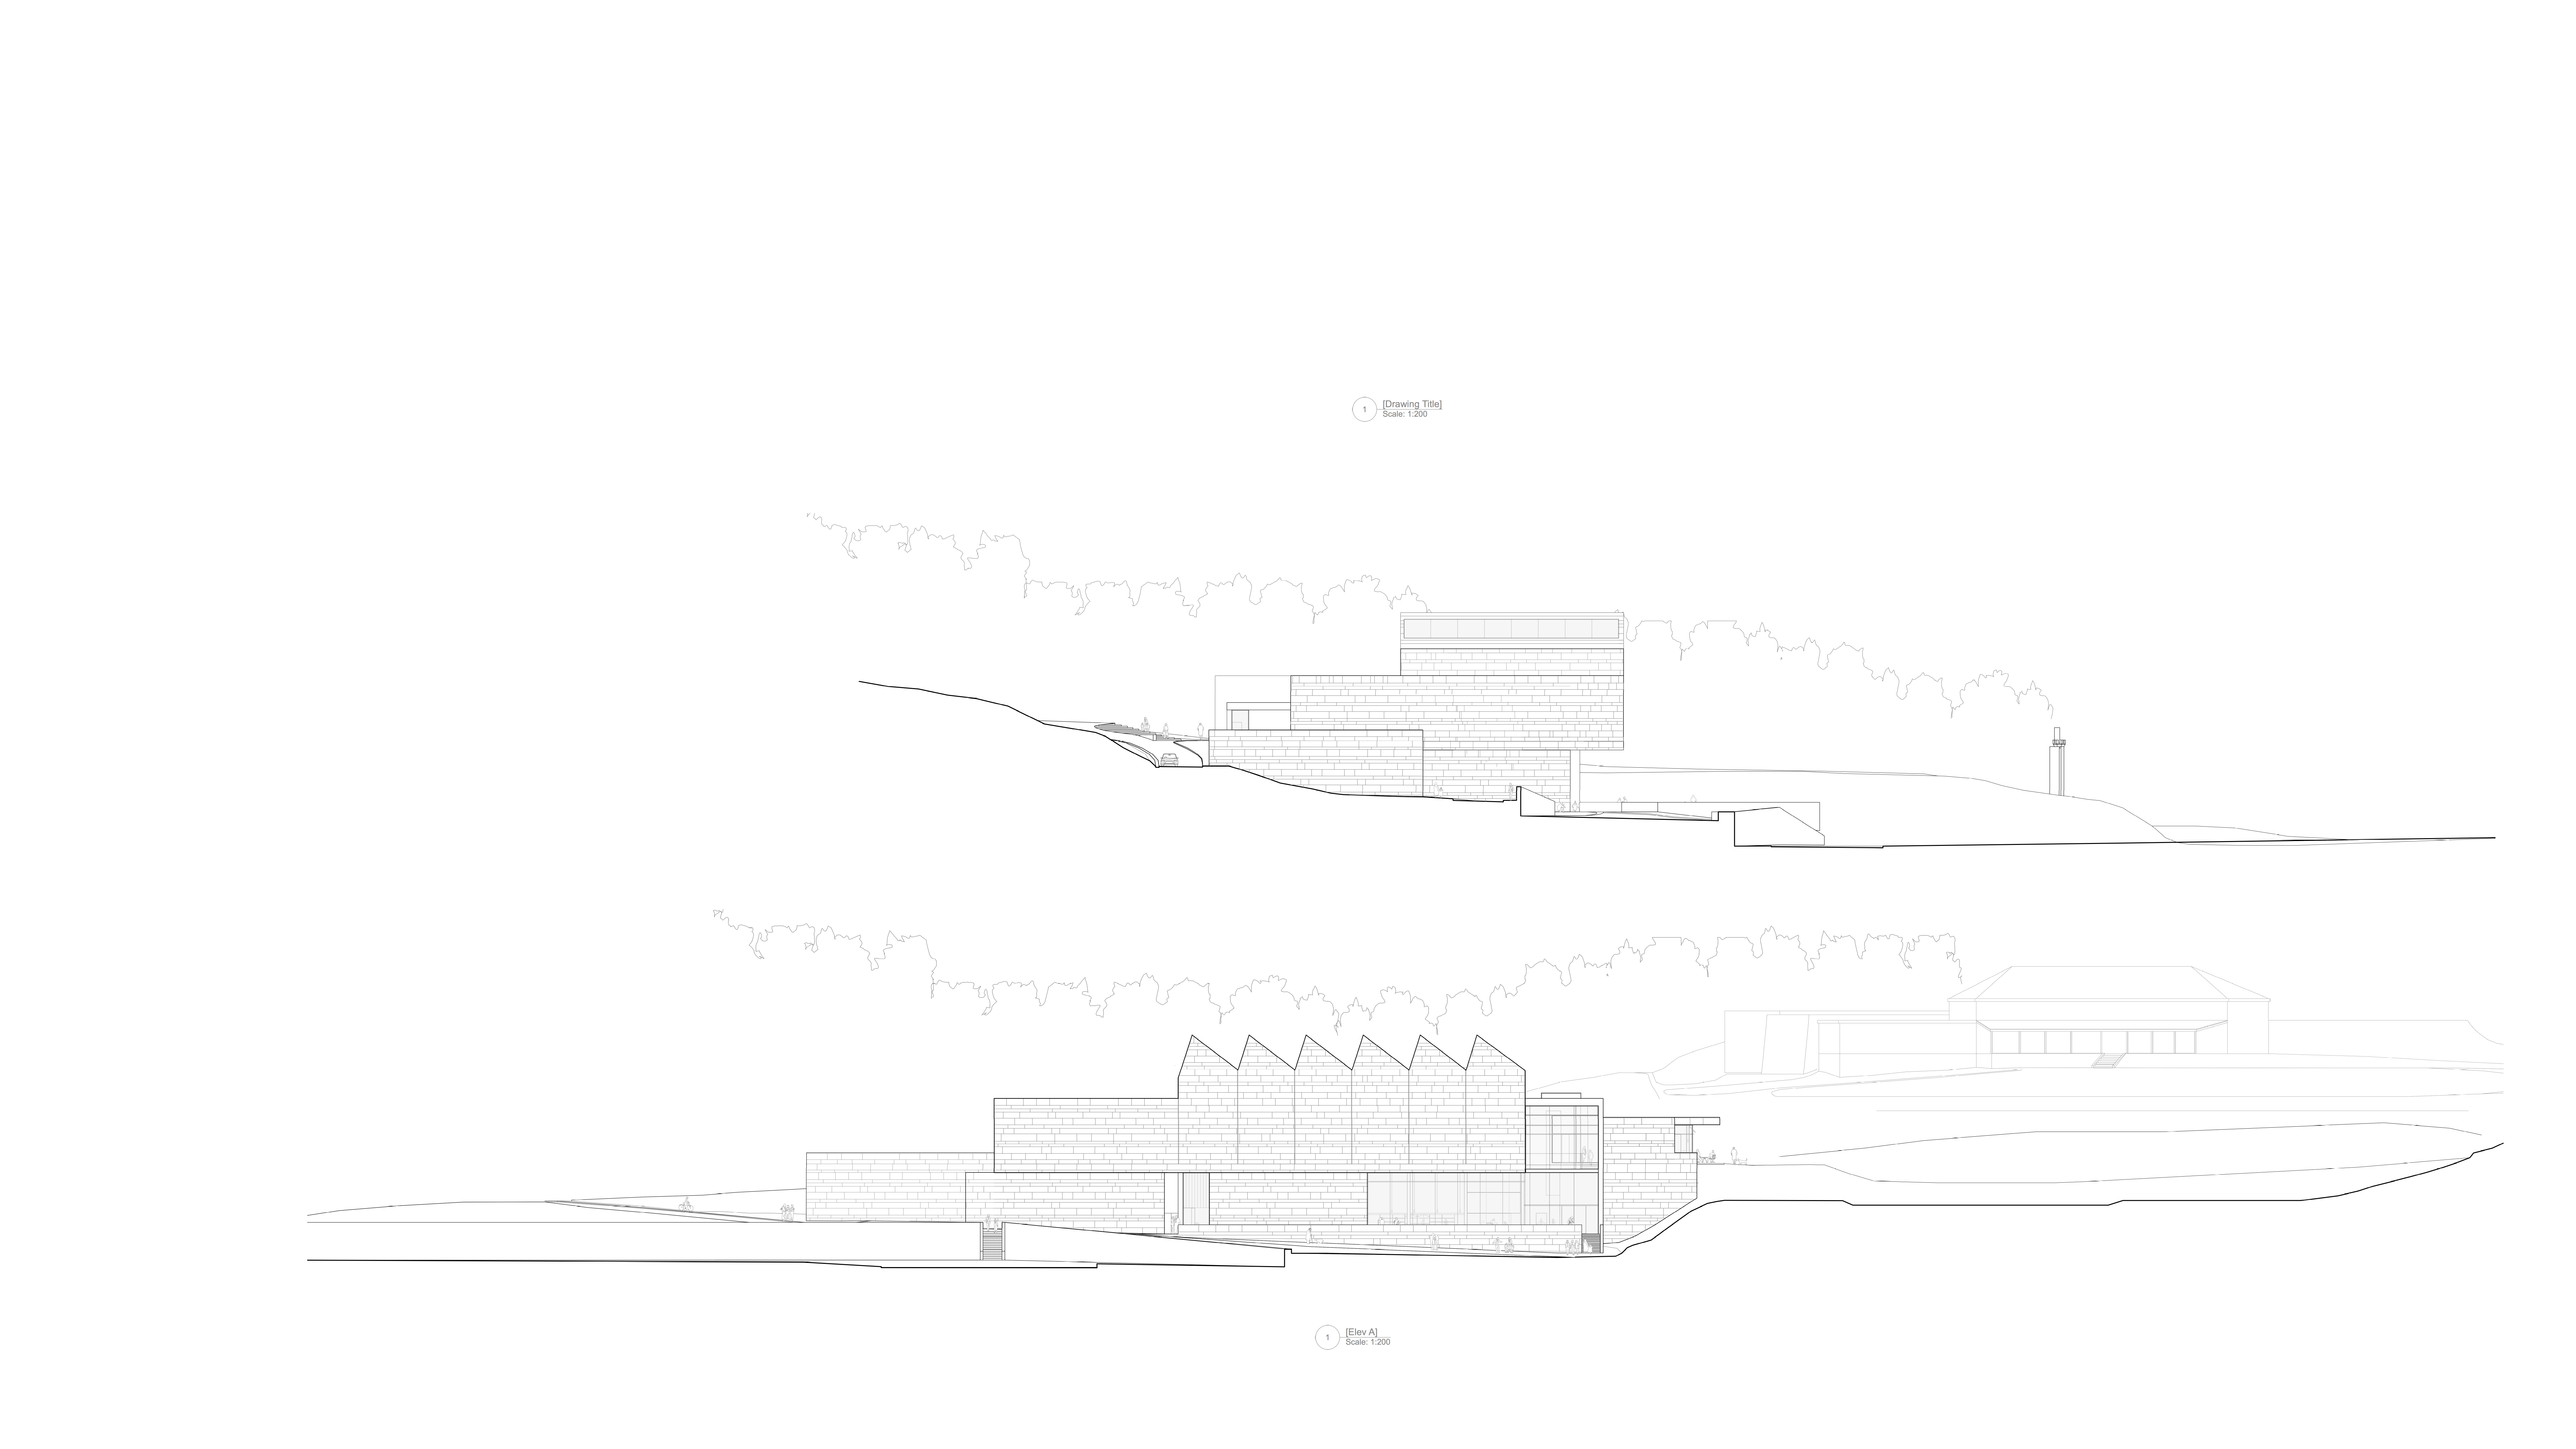 Elevations of the new museum by Keith Williams Architects for lwl-freilichtmuseum Detmold invited competition